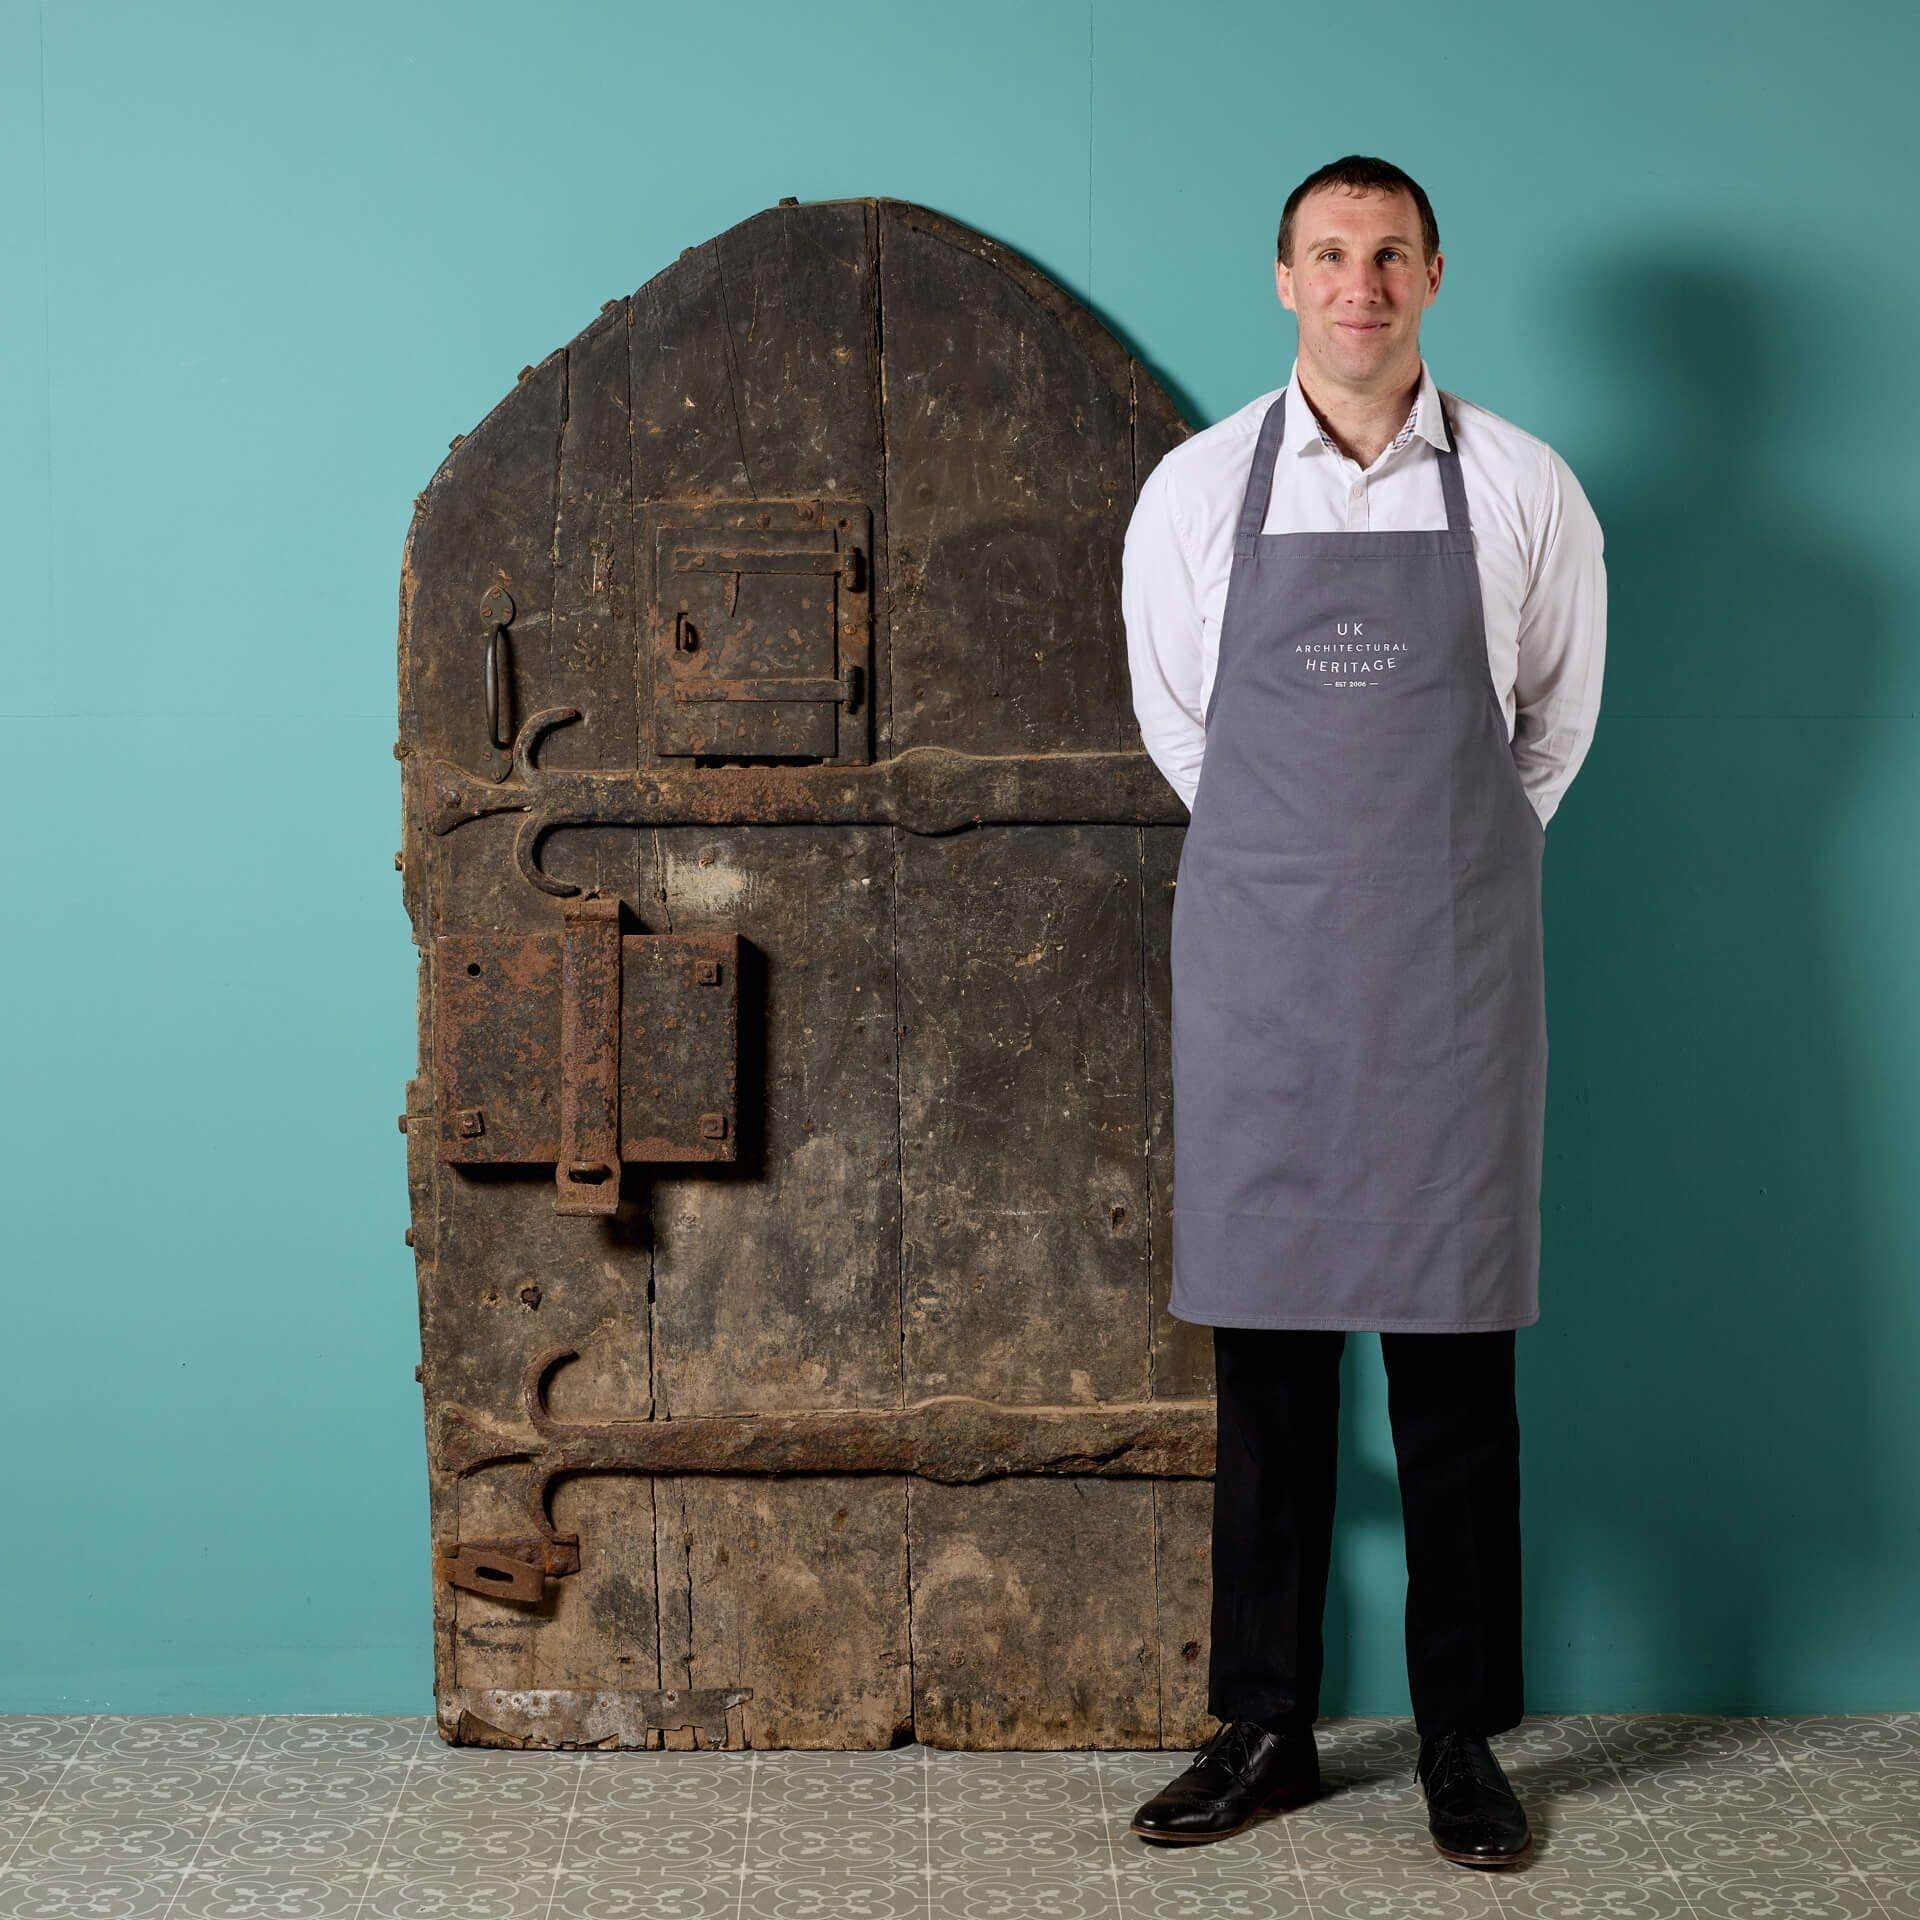 A substantially constructed, heavy medieval era English oak door possibly dating from as early as the 13th century. This 800-year-old door is a rare find and originates from Leominster – perhaps it once stood as an entrance into the halls of the